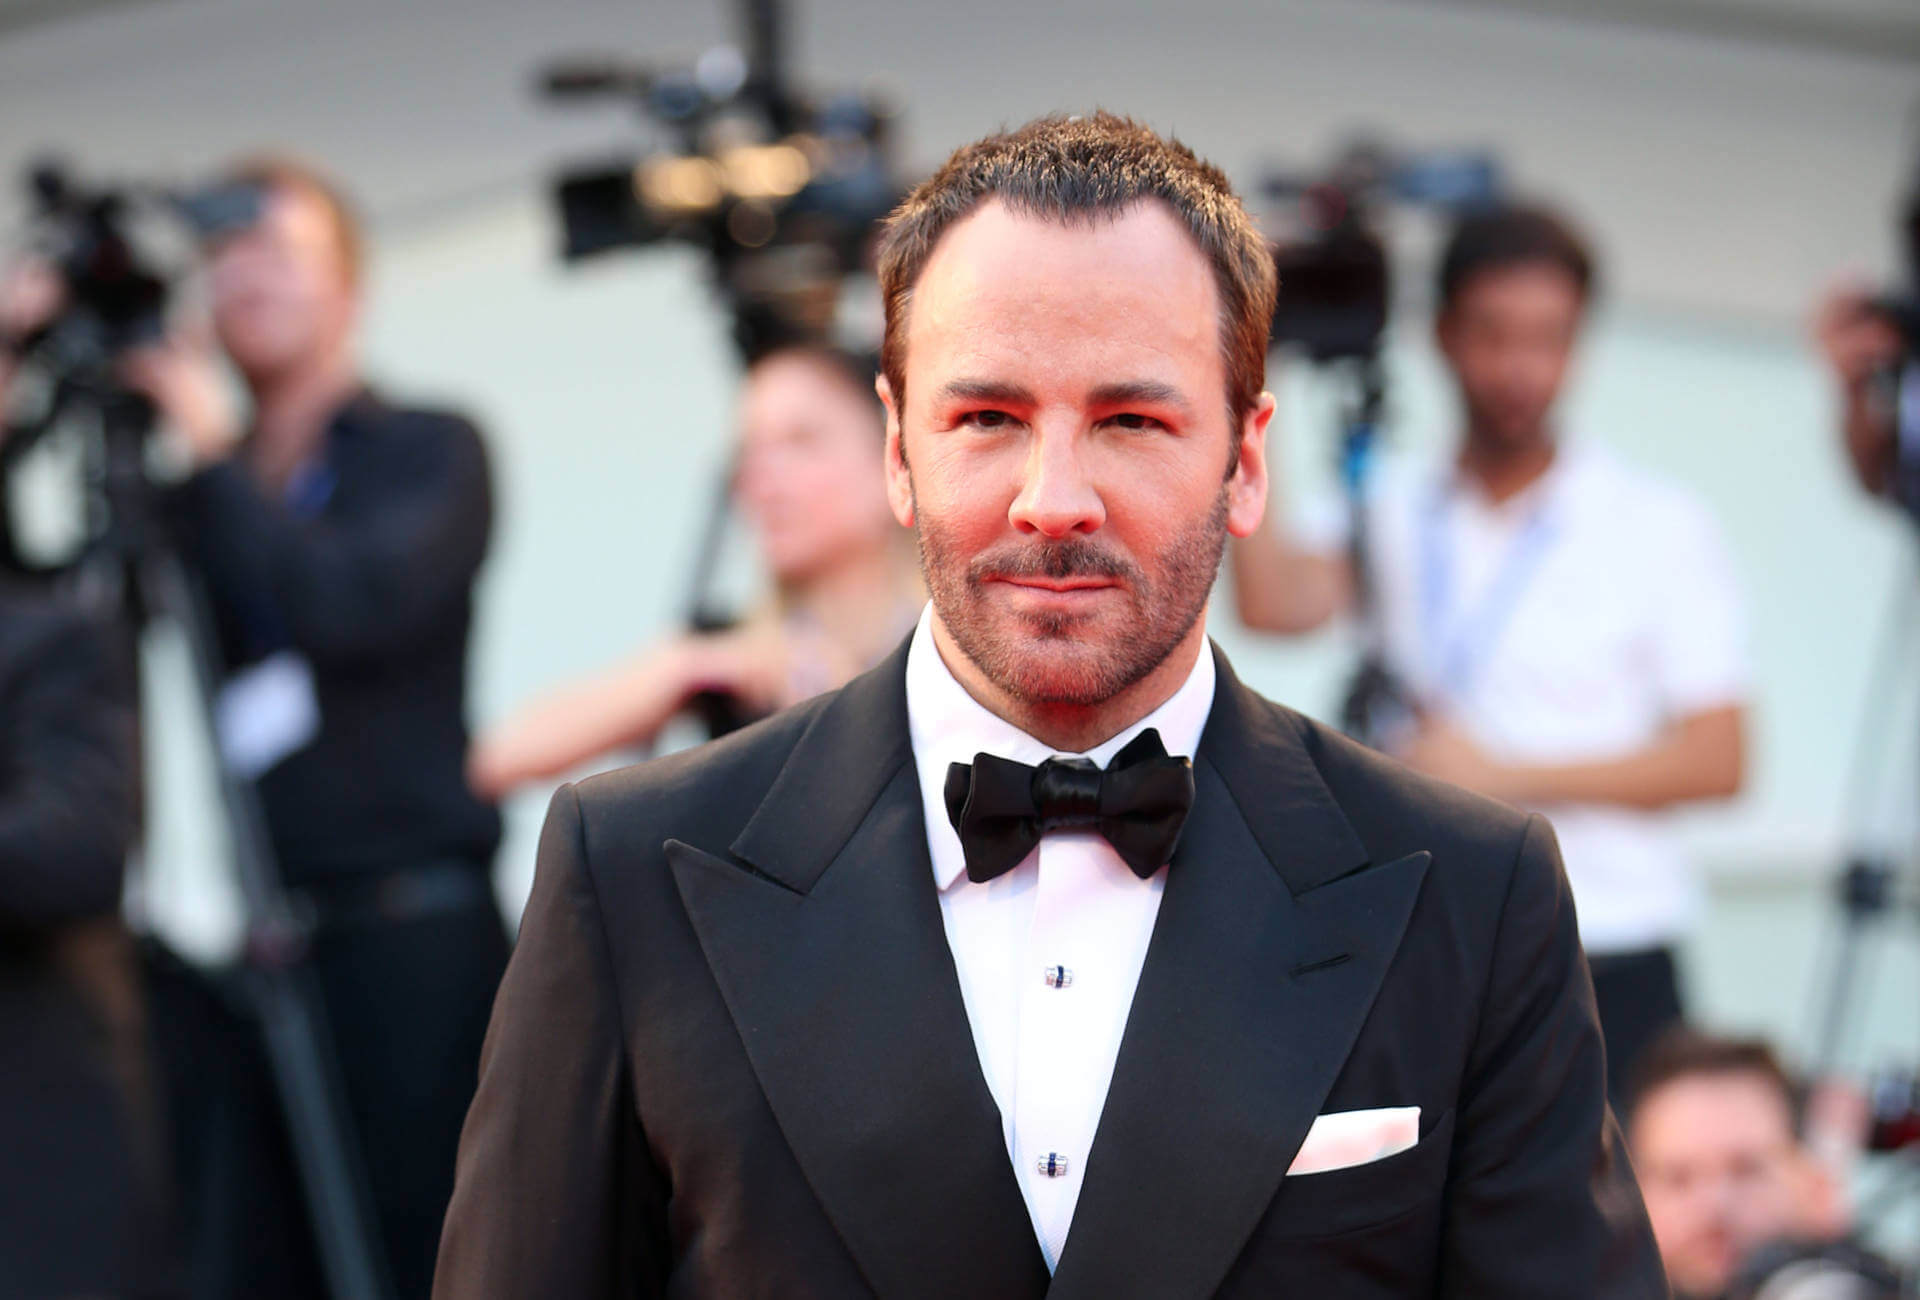 Tom Ford: “A watch should be discreet 